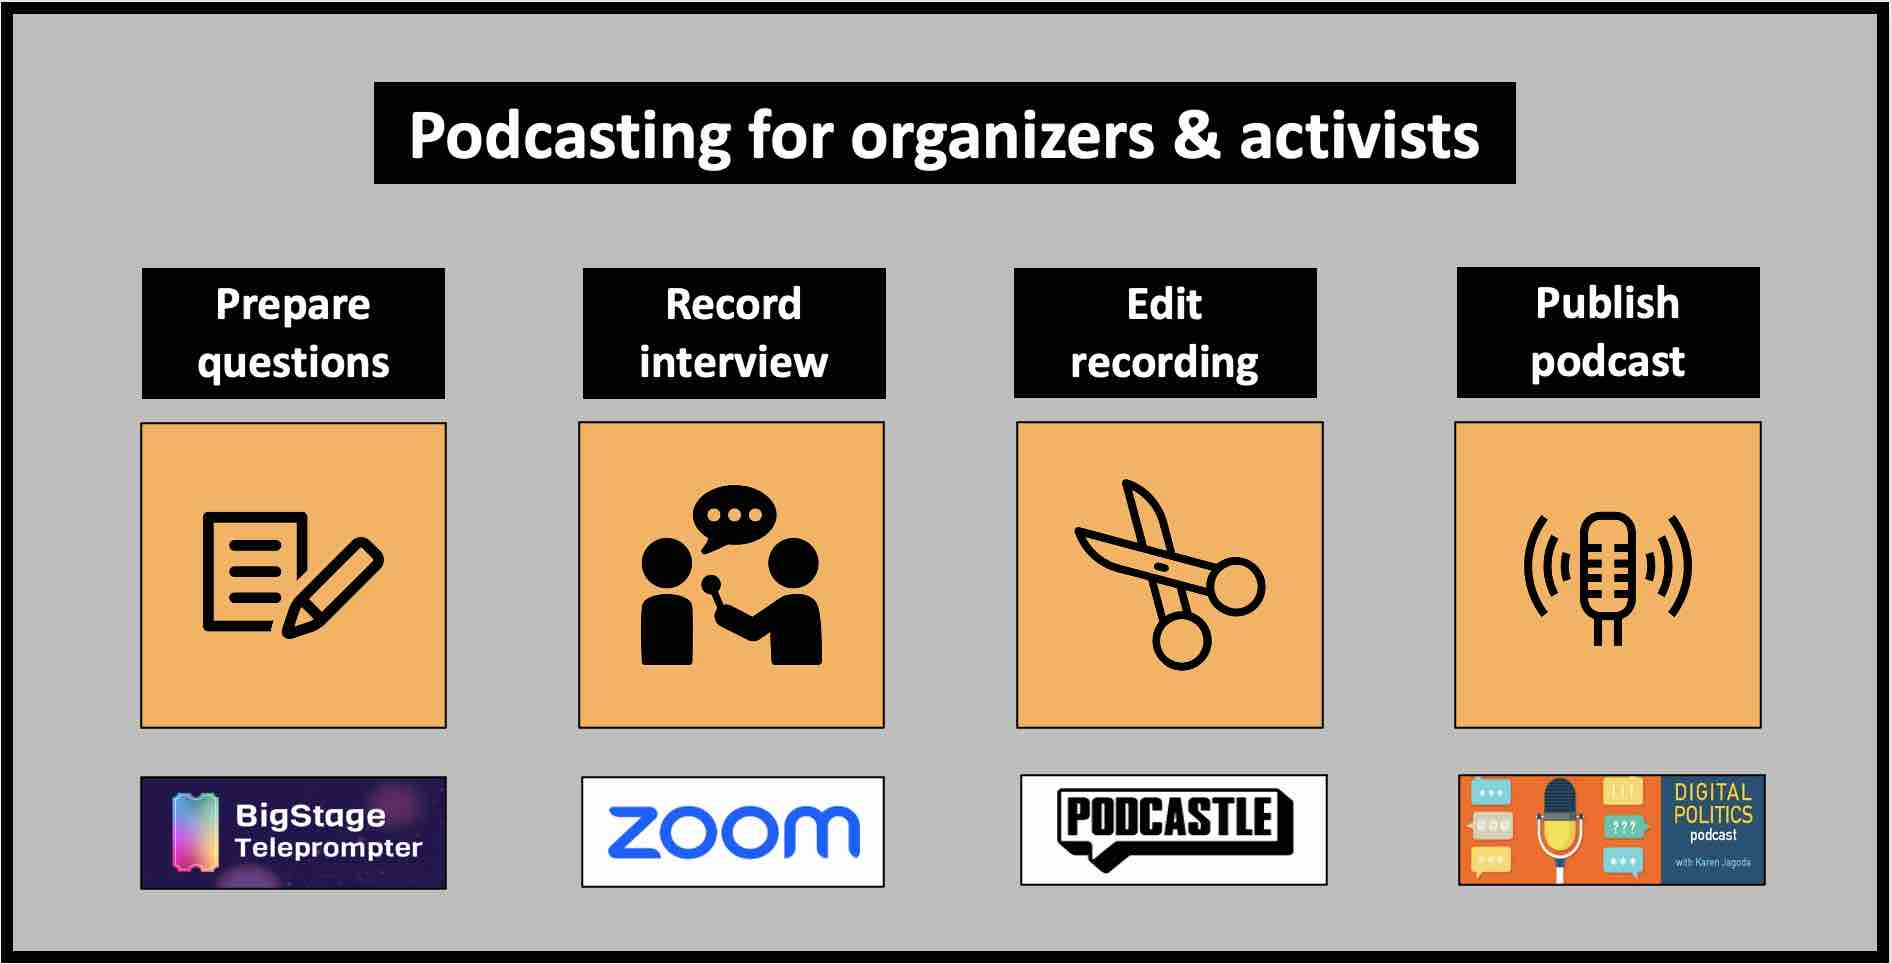 How organizers can reach more people with podcasts